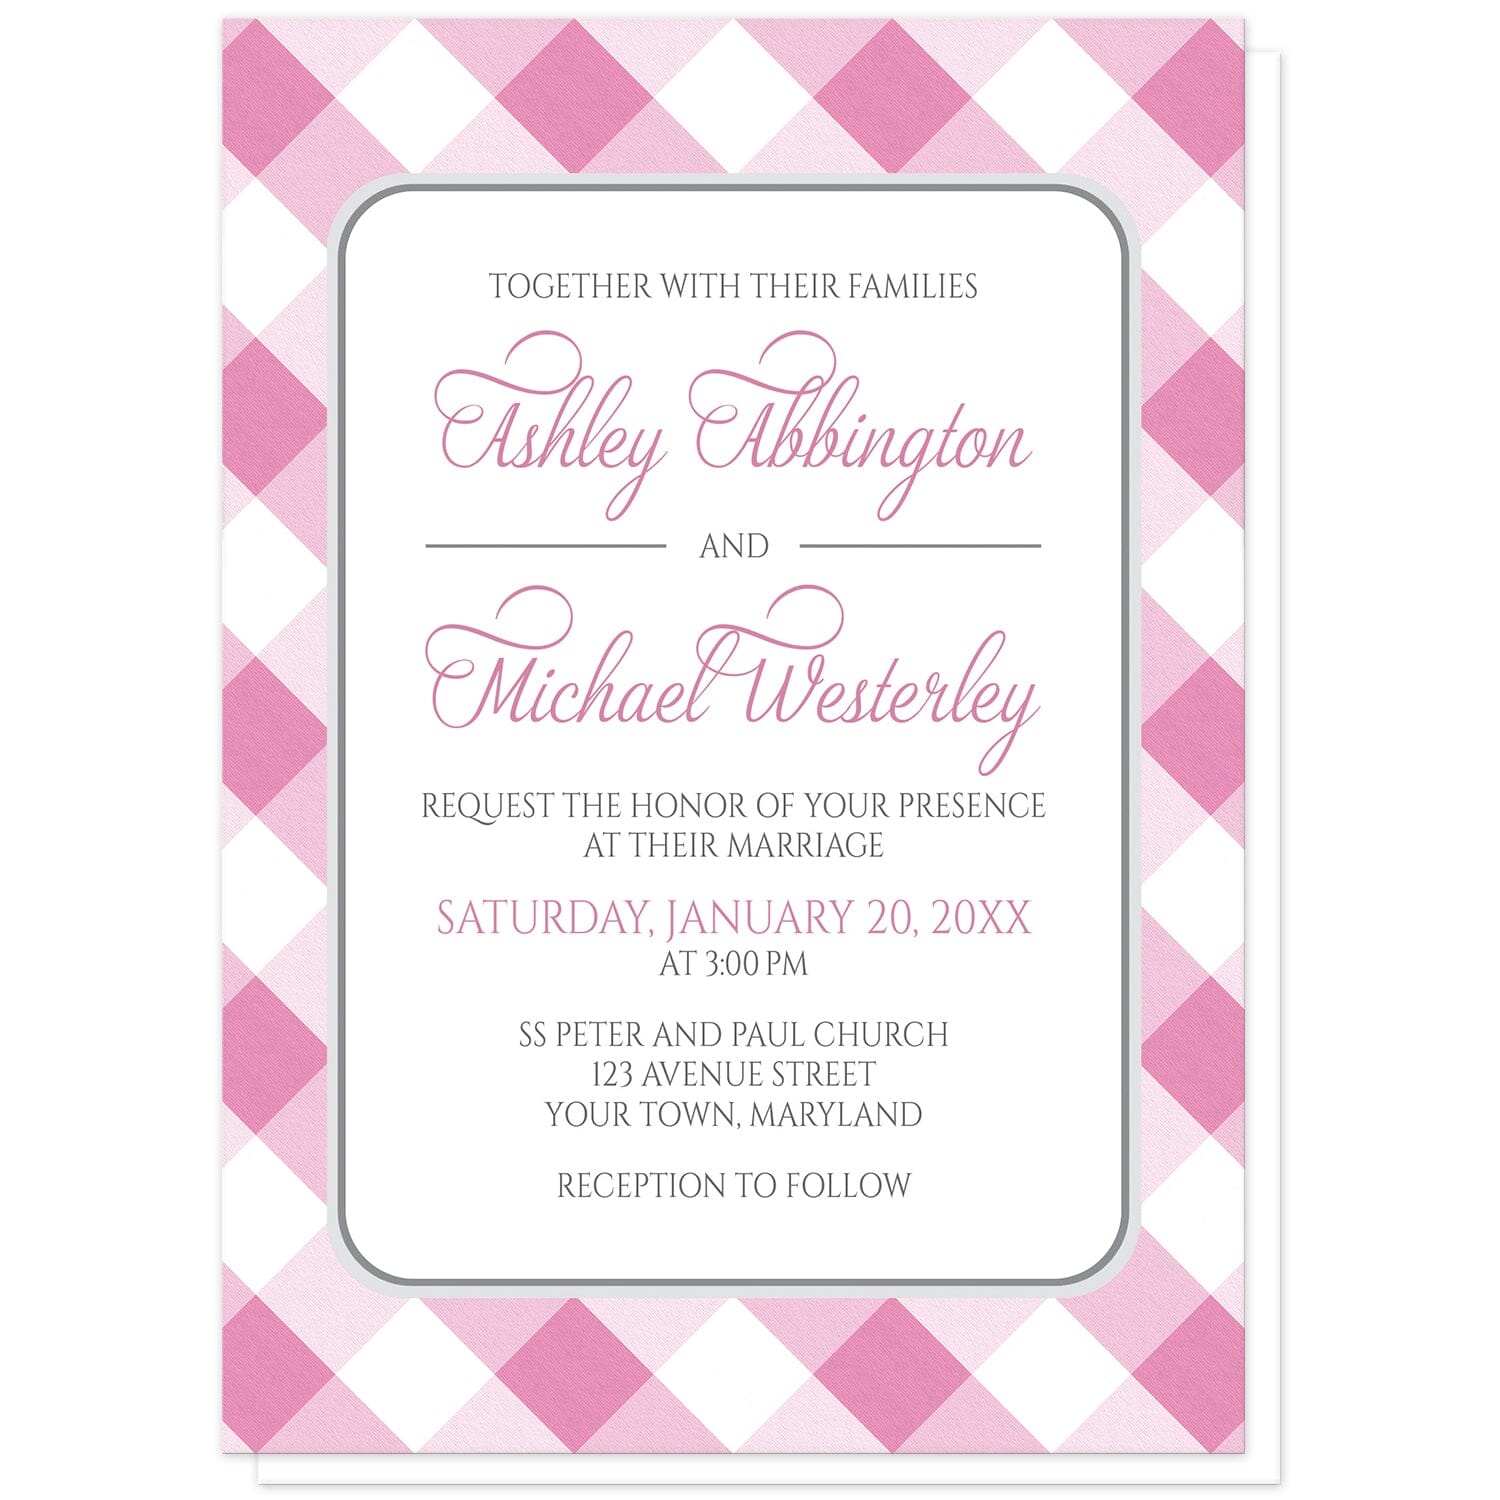 Pink Gingham Wedding Invitations at Artistically Invited. Pink gingham wedding invitations with your personalized wedding ceremony details custom printed in pink and gray inside a white rectangular area outlined in gray. The background design is a diagonal pink and white gingham check pattern. 